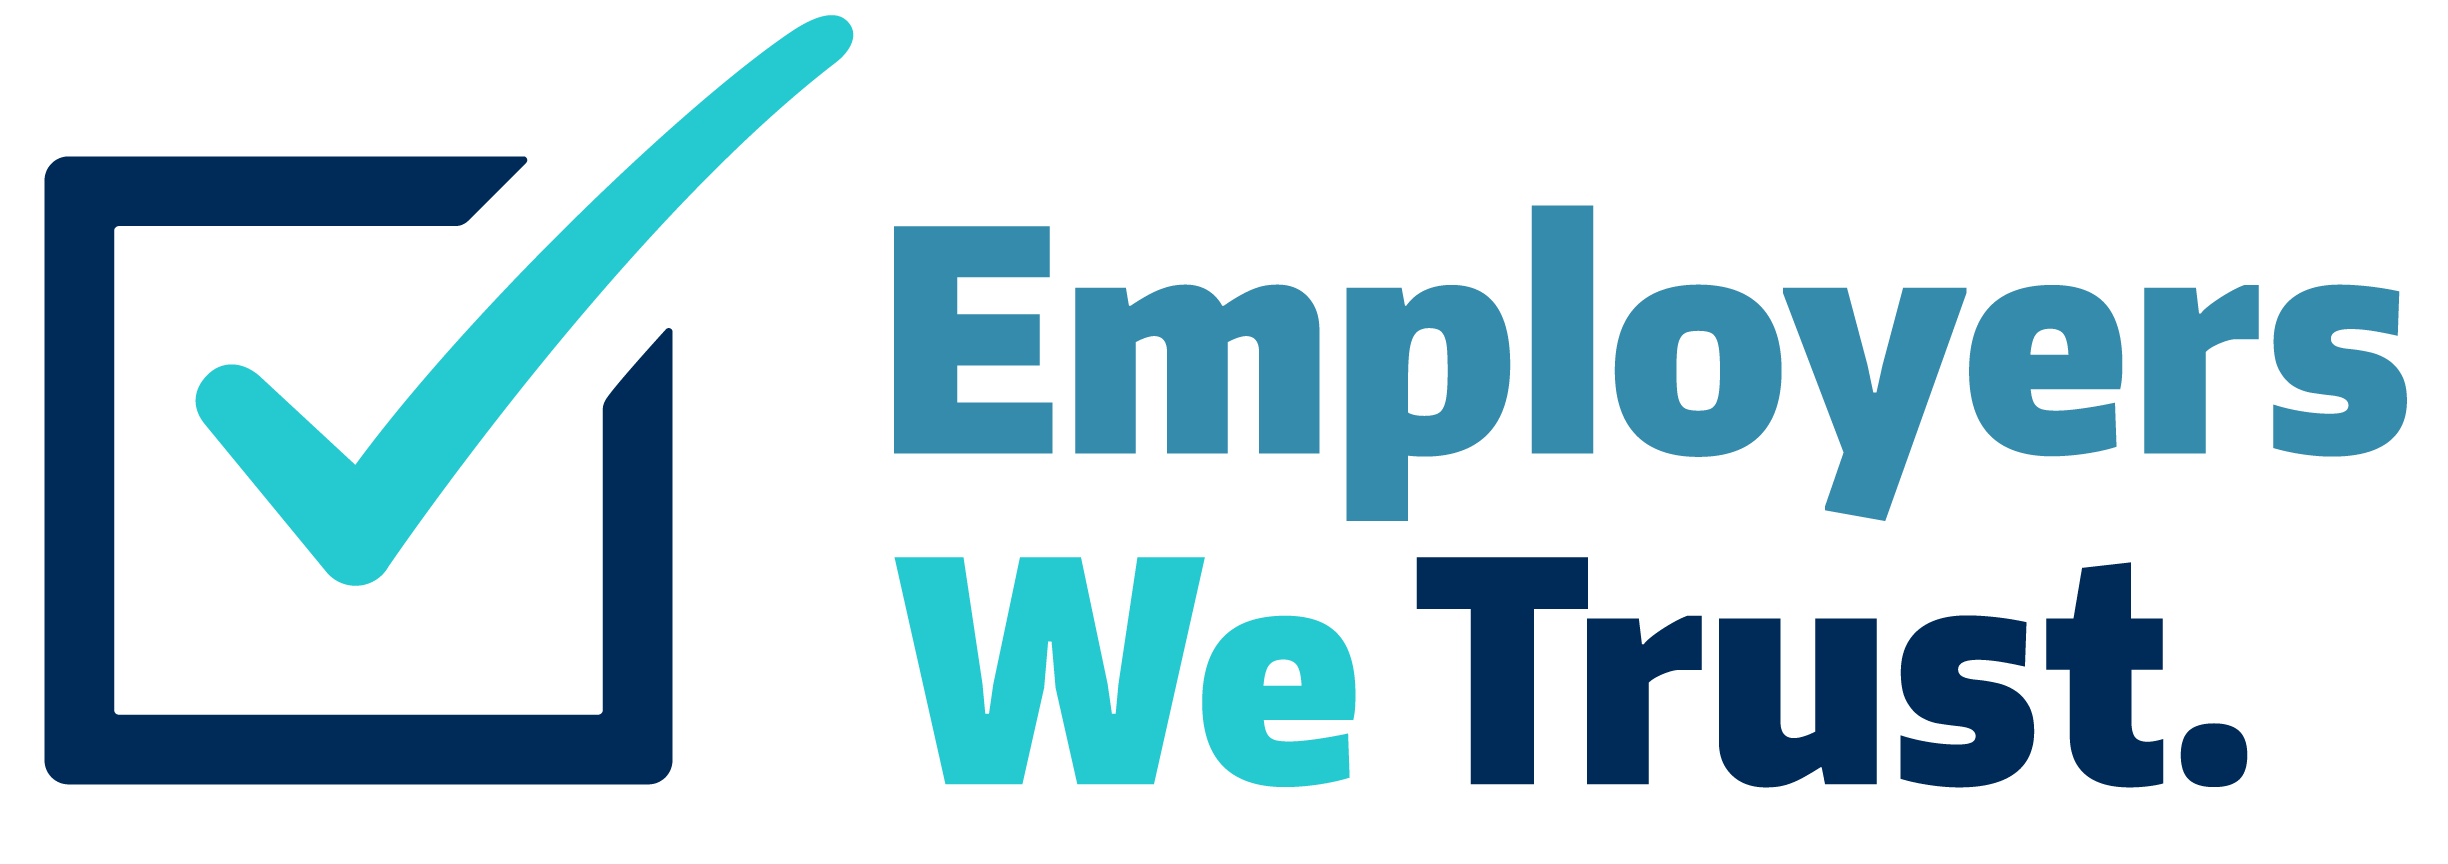 Logo of the quality label "Employers We Trust" by Empiricon.